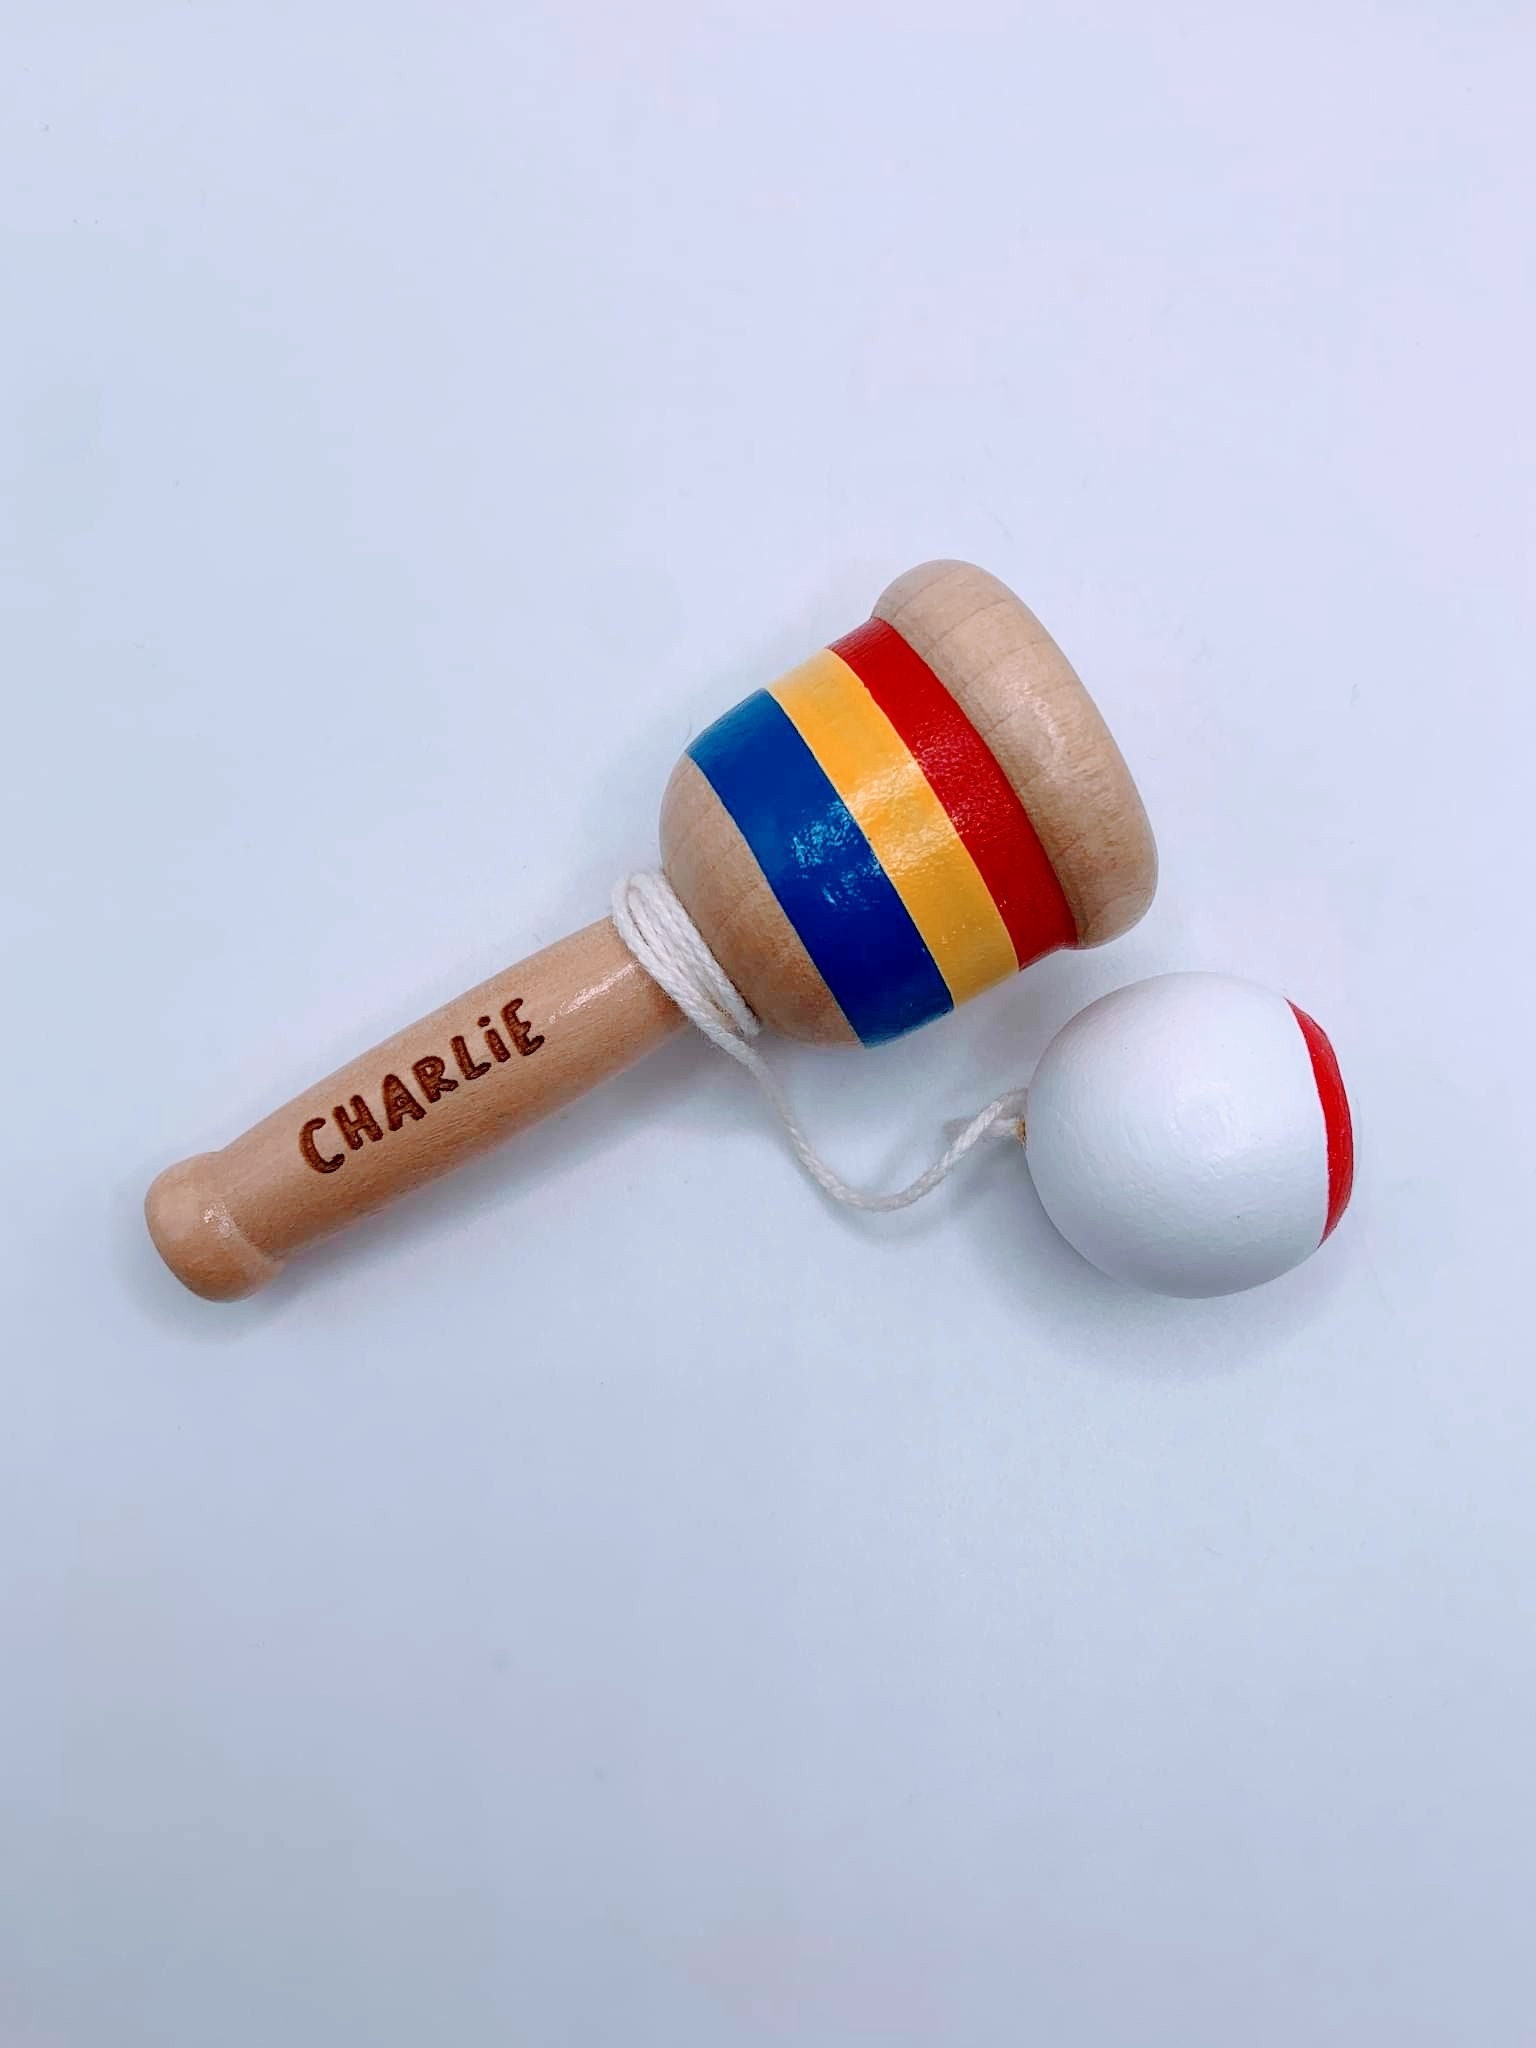 Wood Ball 80 Mm Wood Ball Toy Wood Sphere Croquet Ball Summer Outdoor Game  Wood Ball Kid Turned Wooden Ball Wood Toy for Kids Knitting Ball 